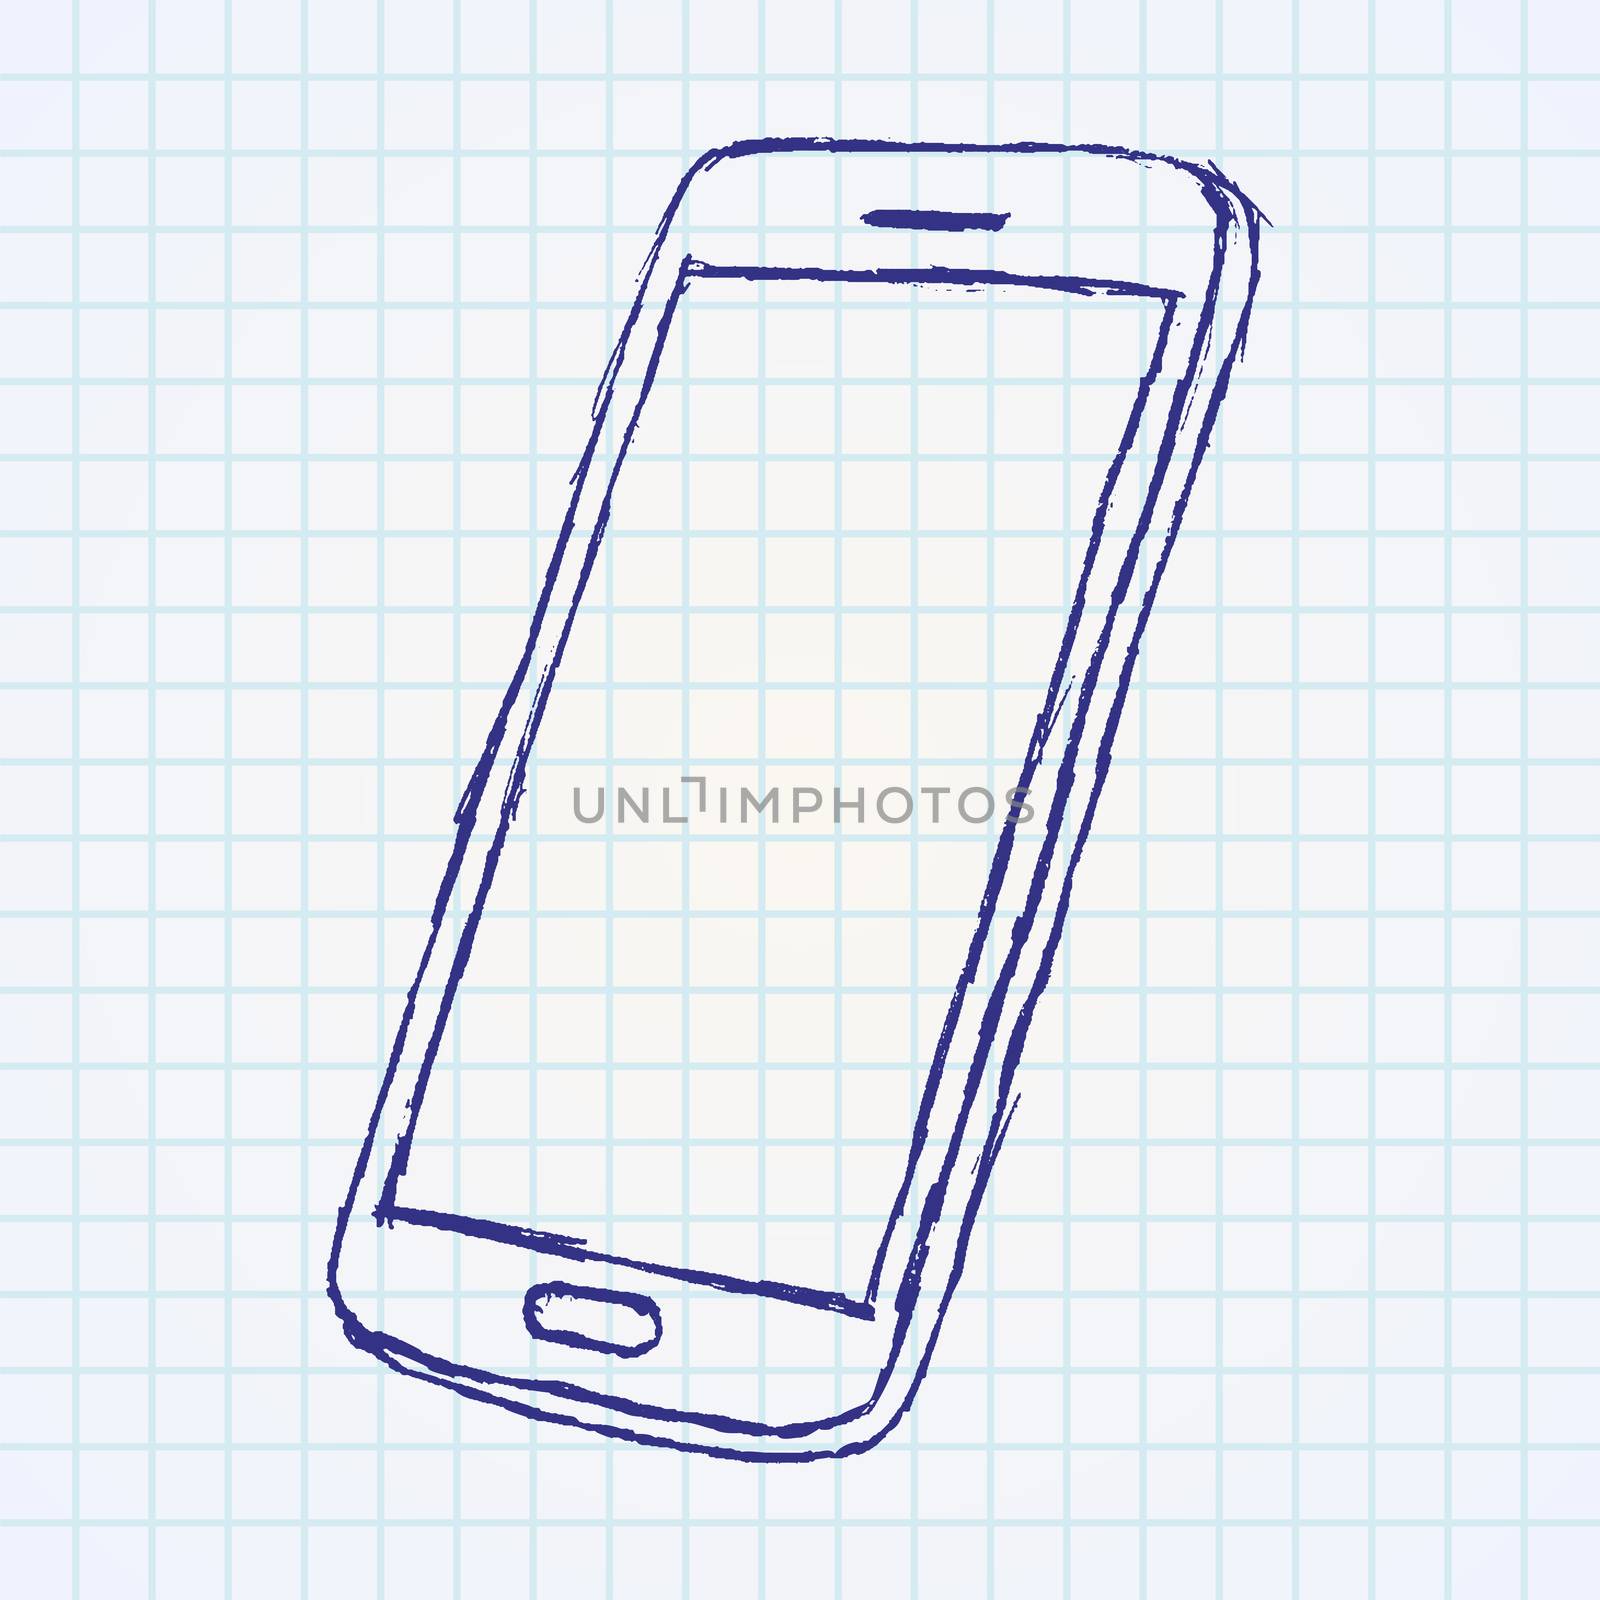 Handdrawn sketch of mobile phone outlined on paper notebook.